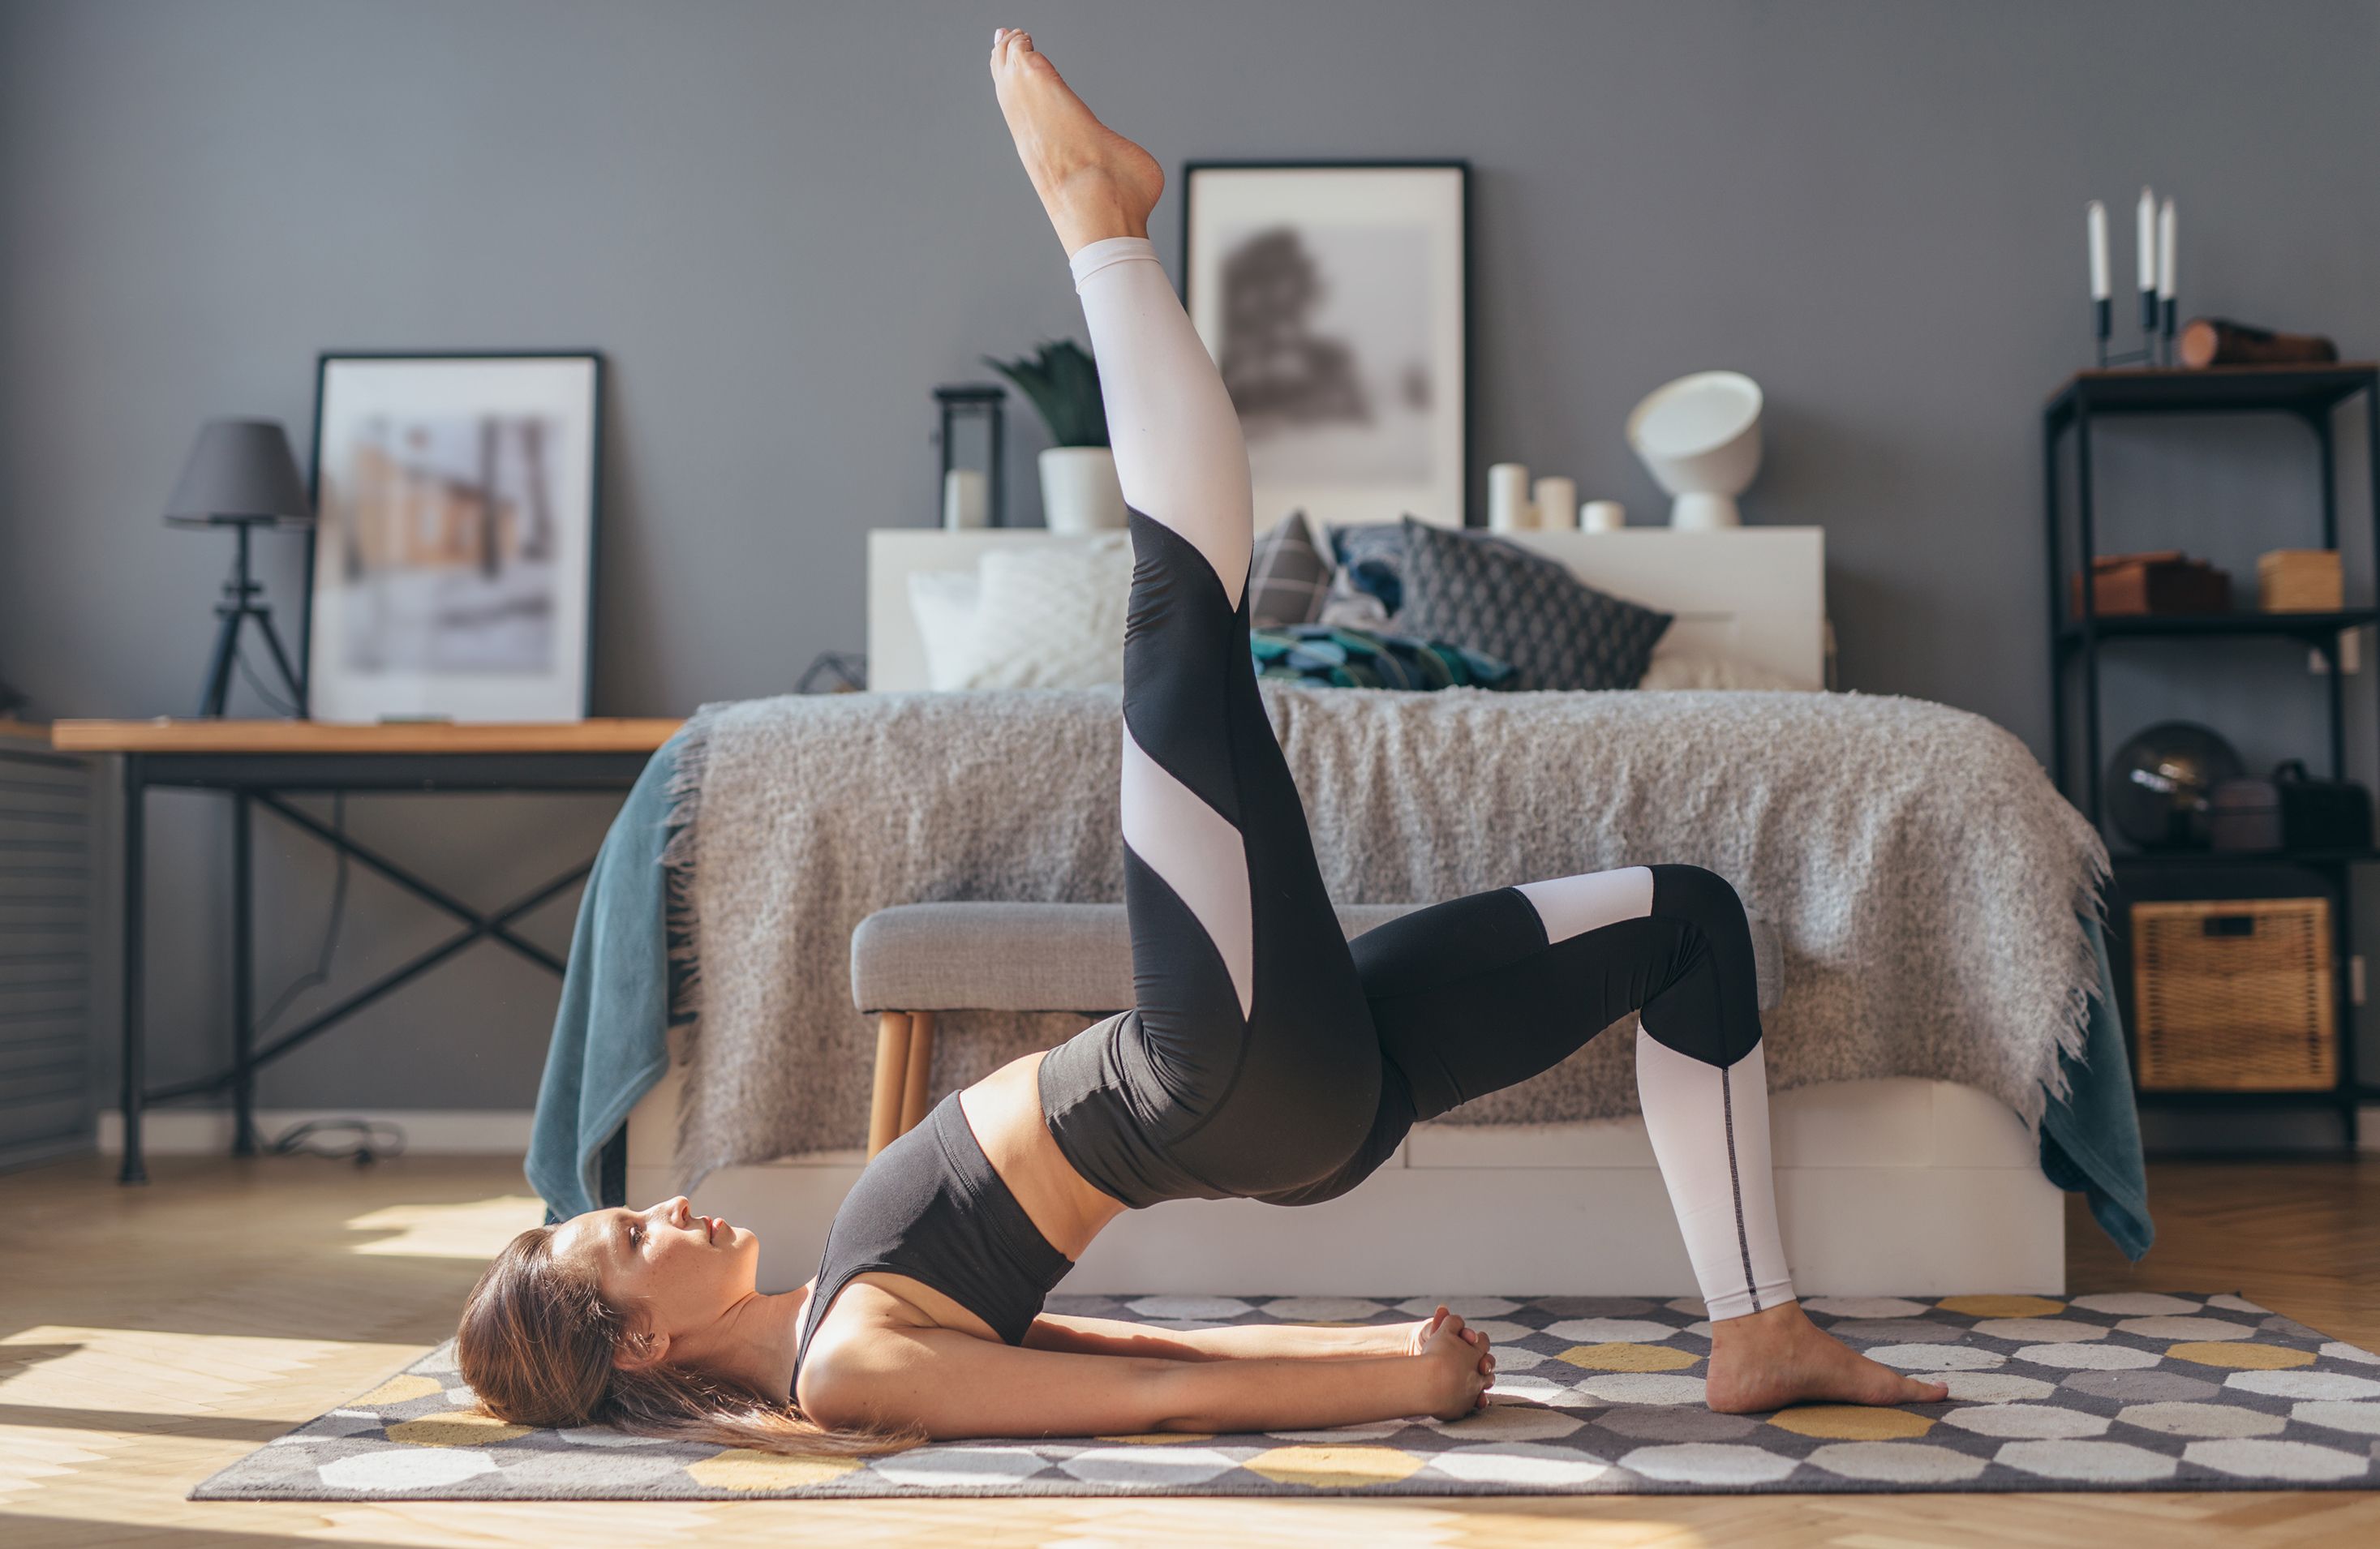 7 Yoga Poses Every Woman Should Practice